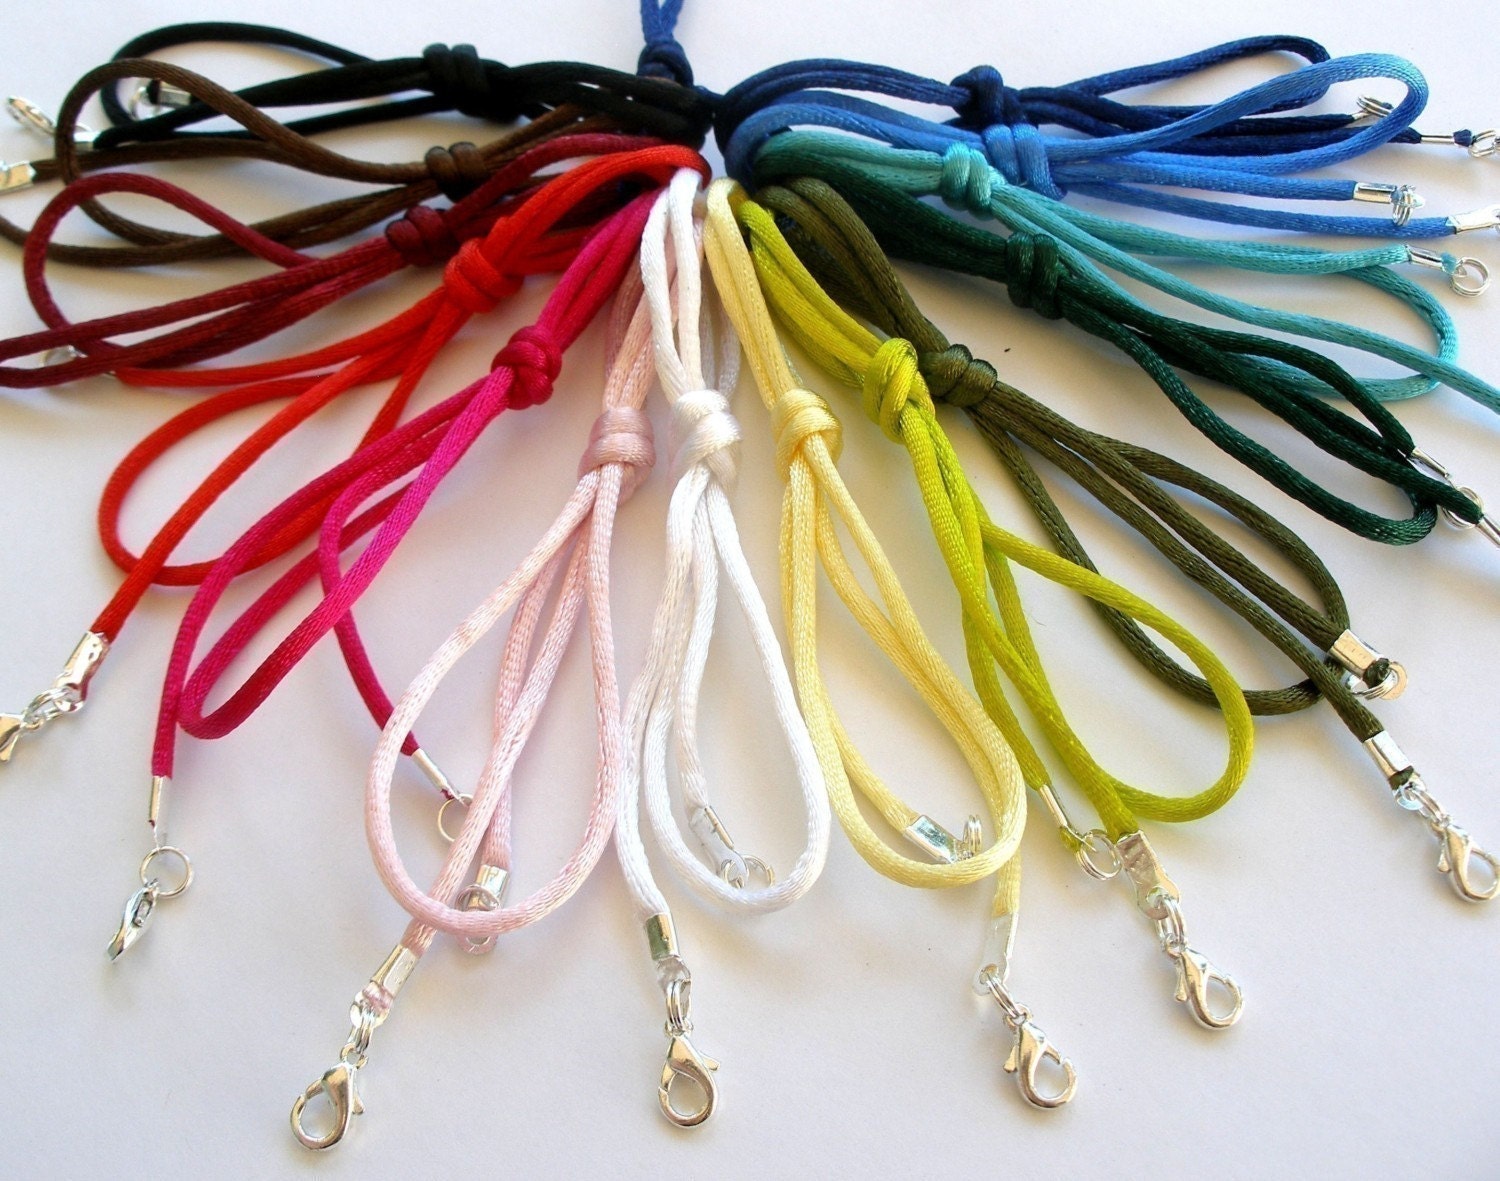 12pc Necklace Cords Rattail  Any Length, 21 Colors - Fits Scrabble/Glass Tile Pendants all Aanraku bails - Handmade in USA